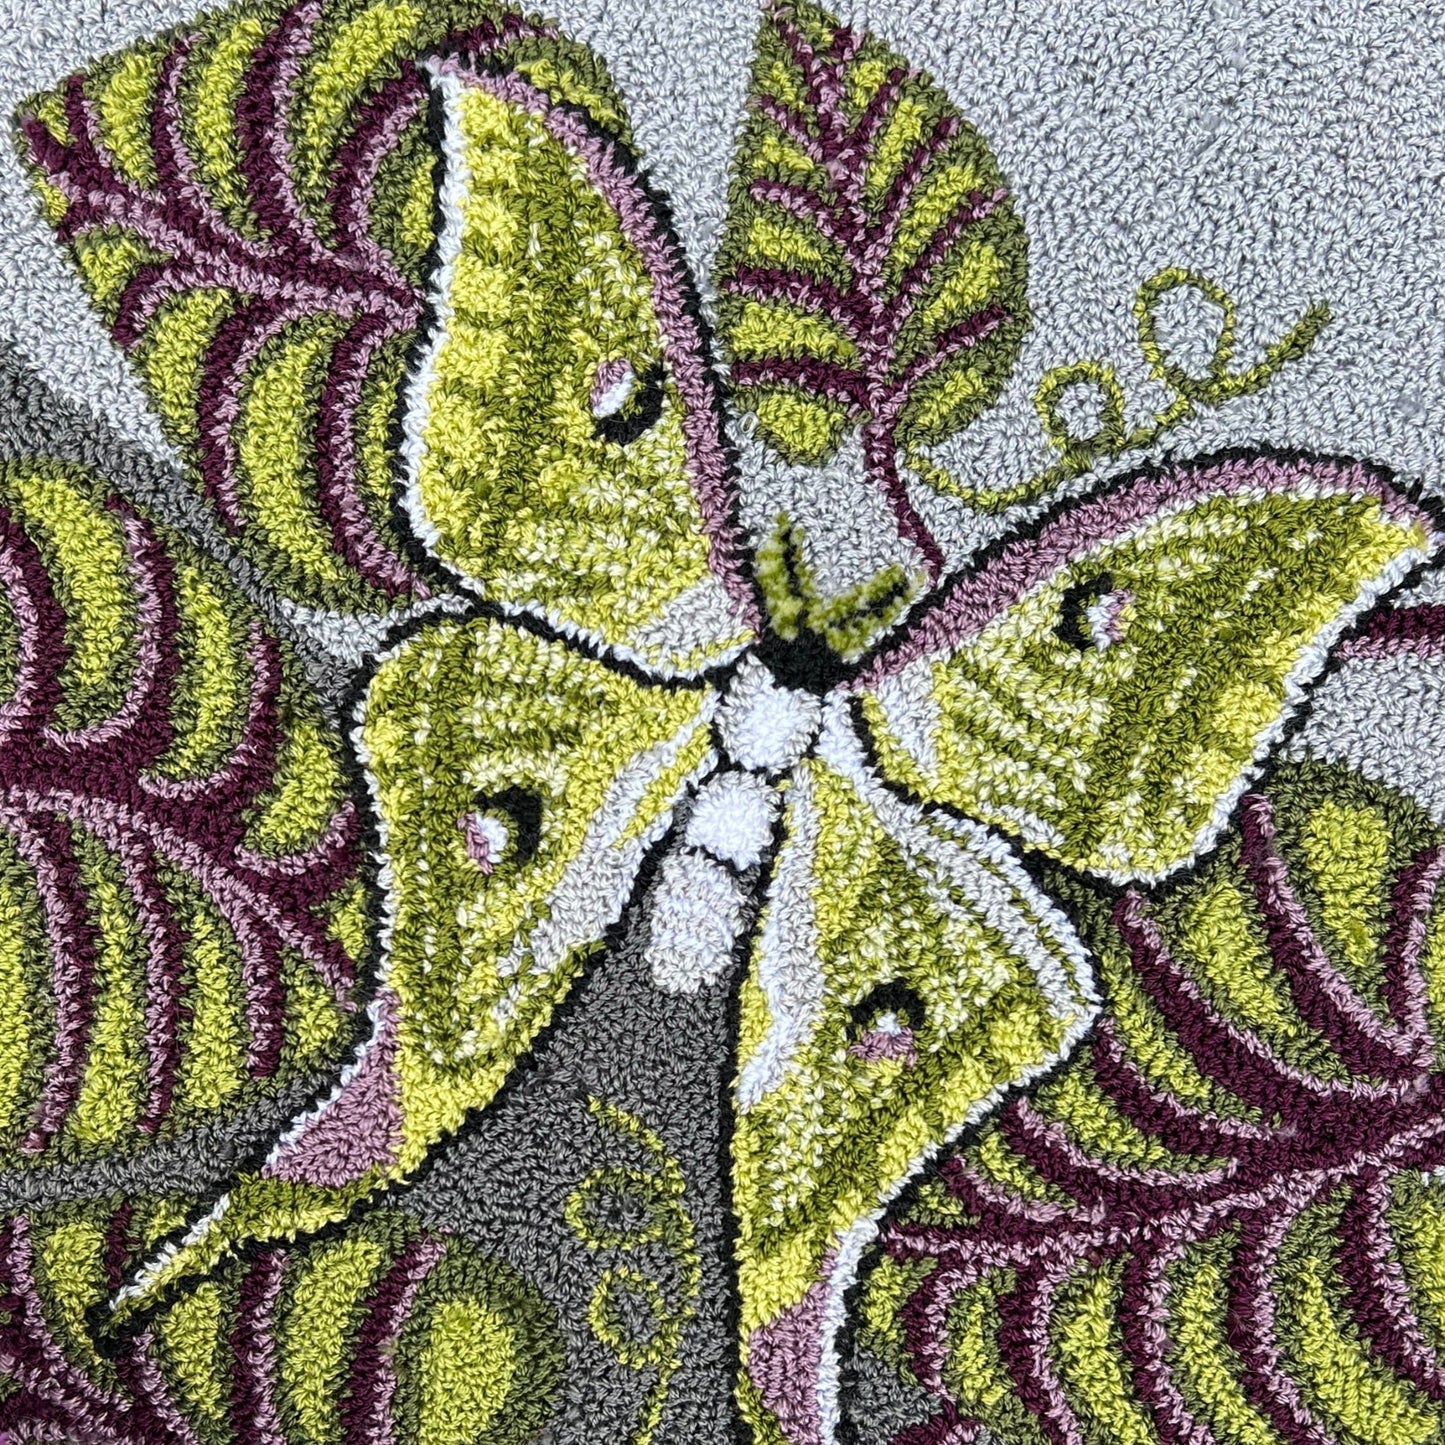 Luna Moth Needle Punch Pattern with custom thread kit by Orphaned Wool, Copyright © 2023 Kelly Kanyok. This pattern of a Luna Moth within the leaves is available as a Paper or Cloth pattern.